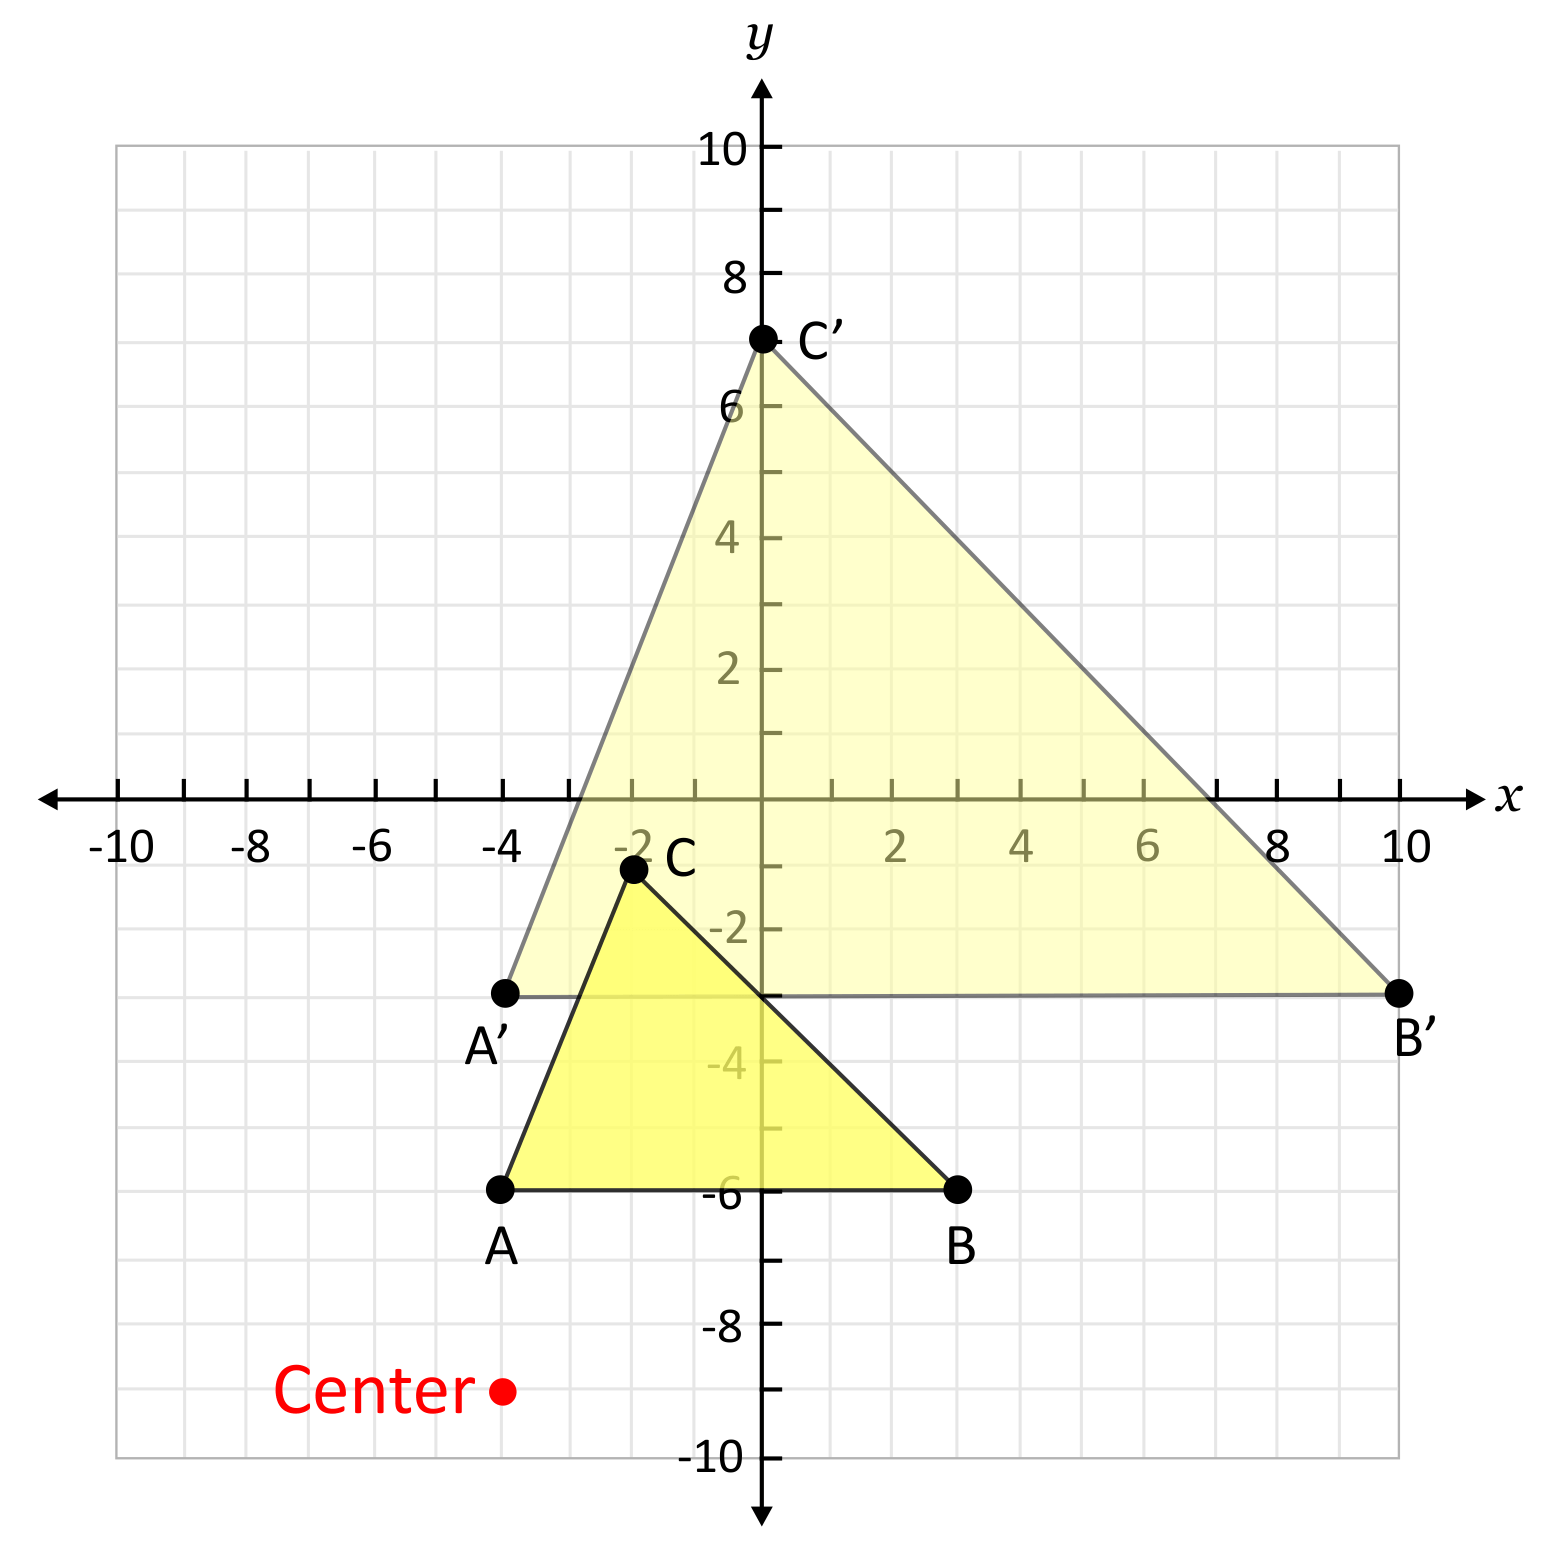 One large triangle and a smaller one on a coordinate plane with a center point